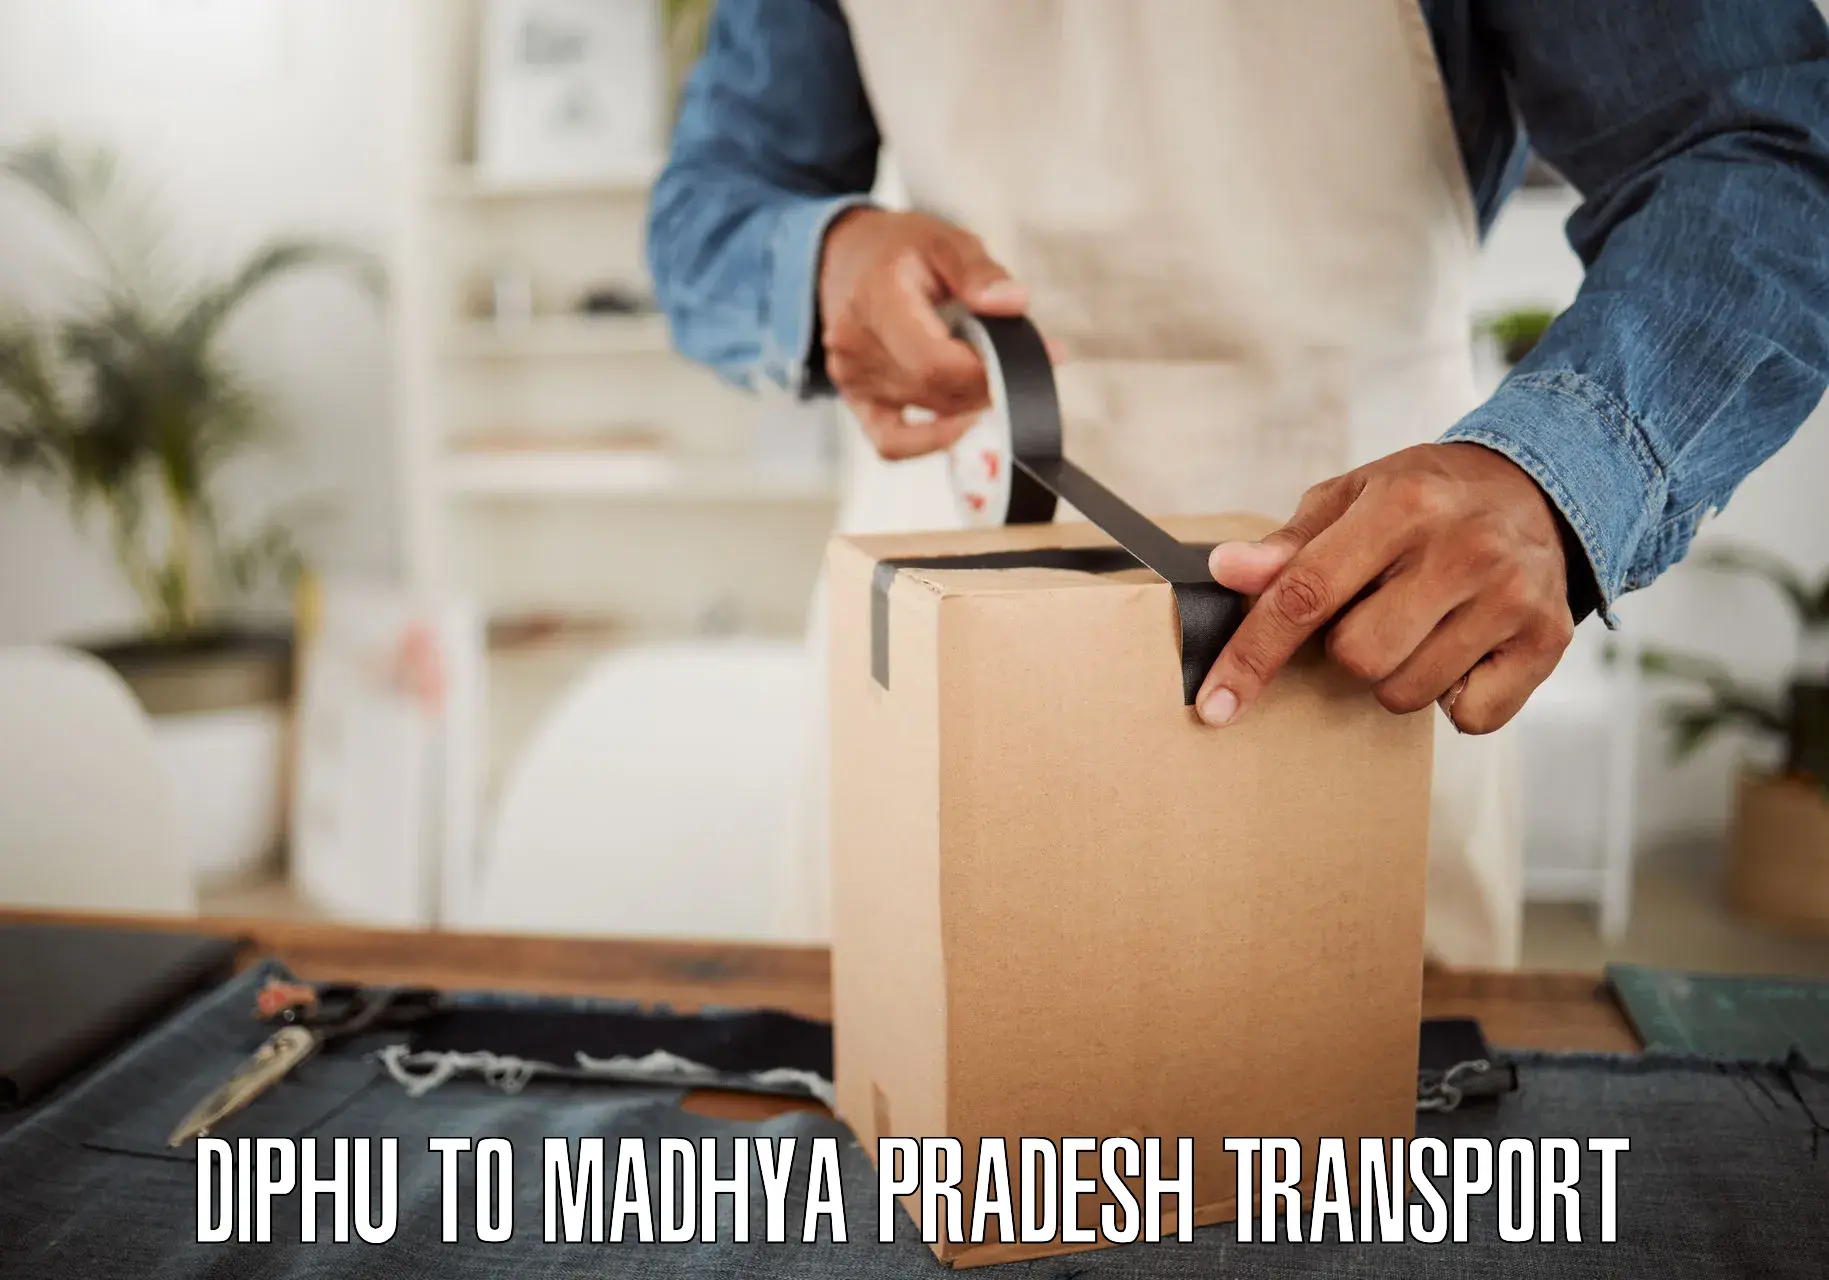 Package delivery services Diphu to Itarsi